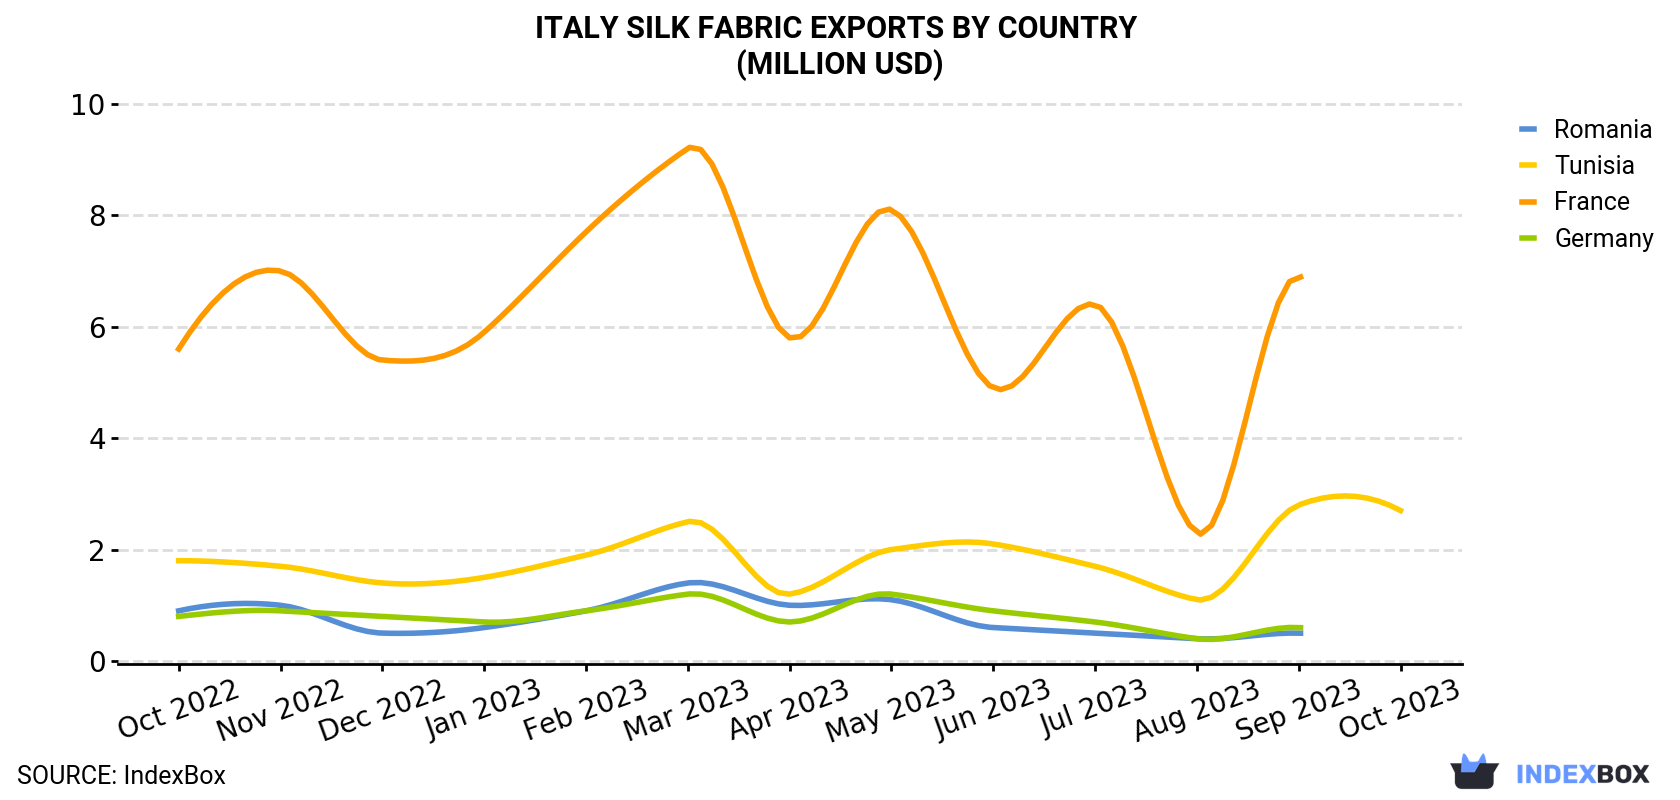 Italy Silk Fabric Exports By Country (Million USD)